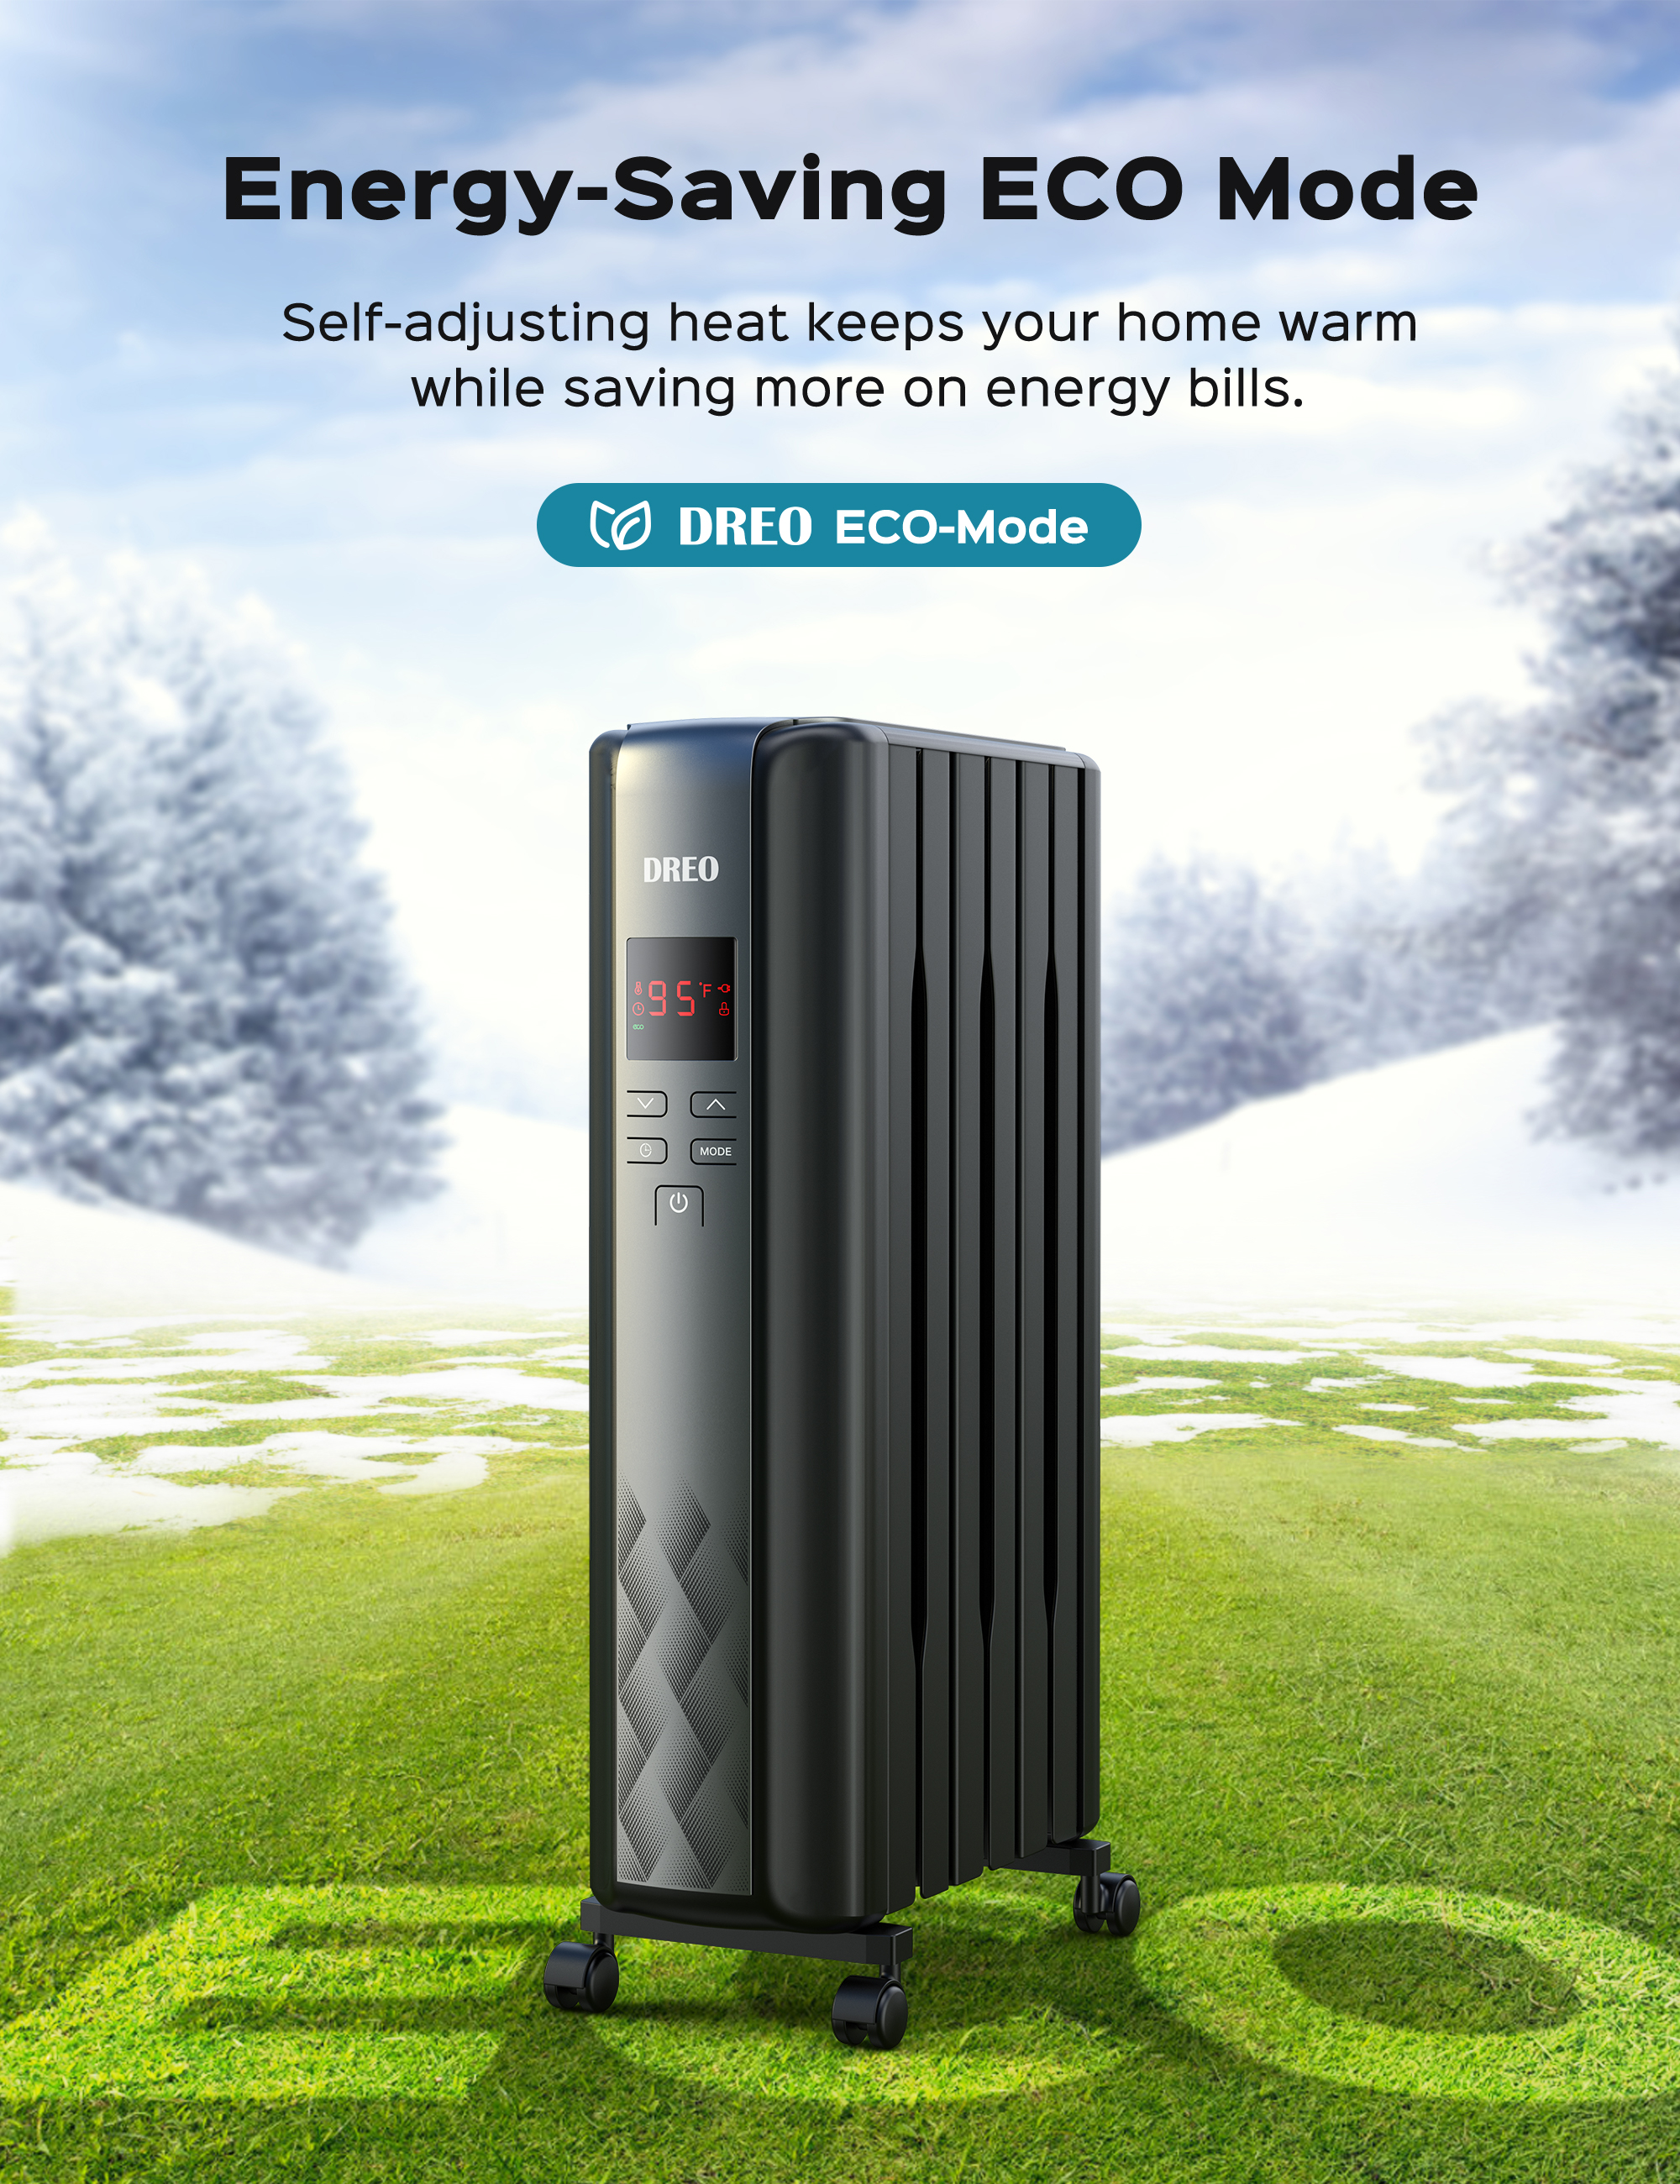 Dreo Radiator Heater, Upgrade 1500W Electric Portable Space Oil Filled Heater with Remote Control, 4 Modes, Overheat & Tip-Over Protection, 24h Timer, Digital Thermostat, Quiet, Indoor - image 2 of 7